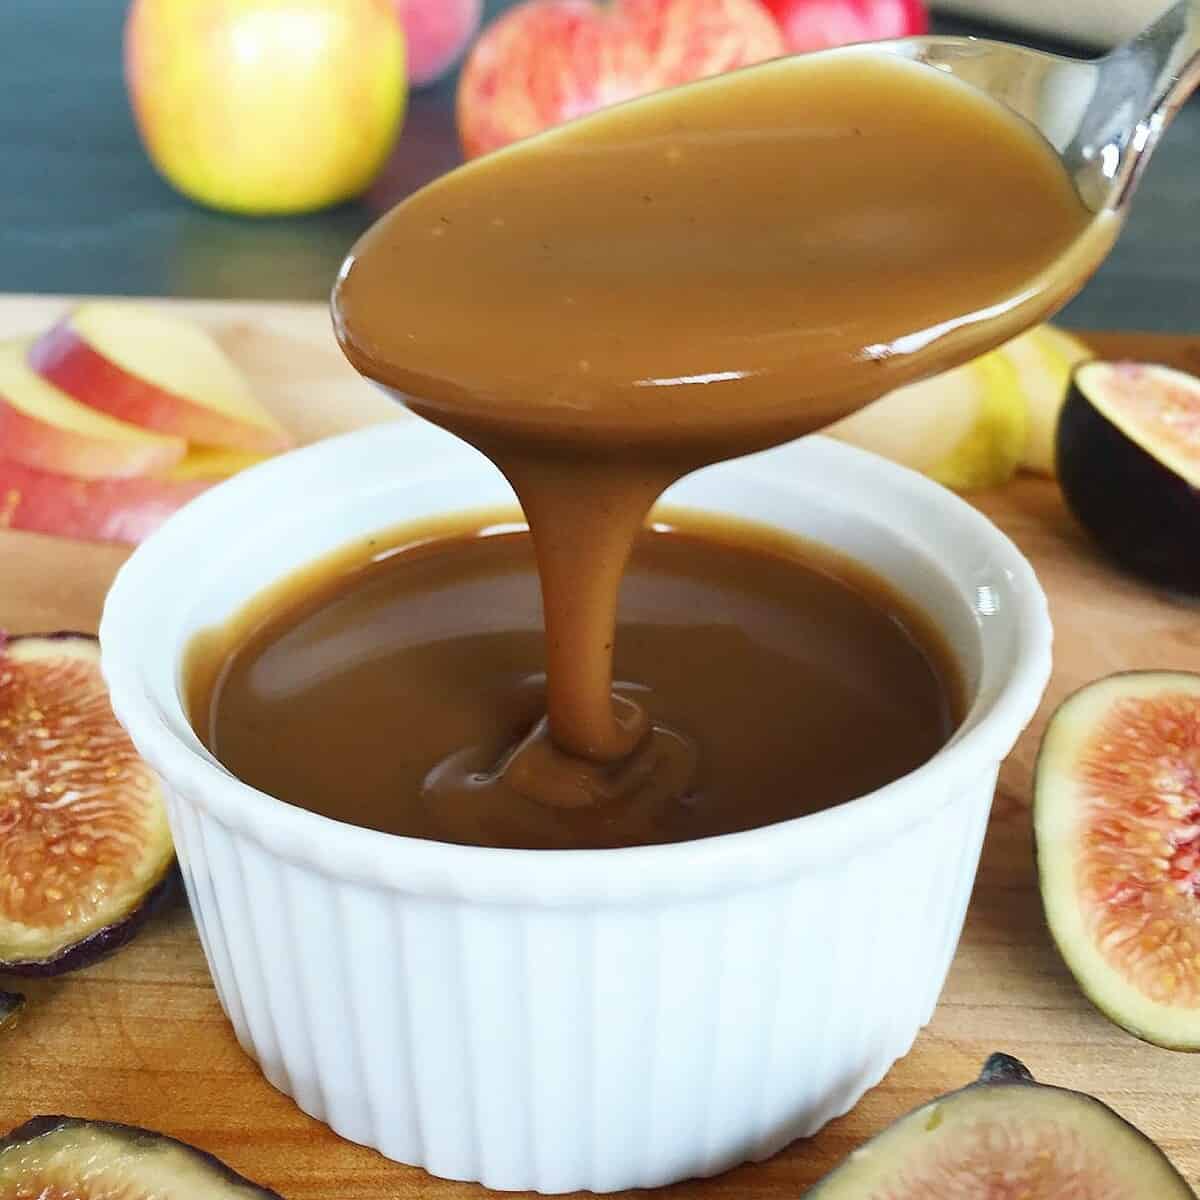  Satisfy your sweet cravings with this vegan dulce de leche caramel sauce that has no dairy or animal products.